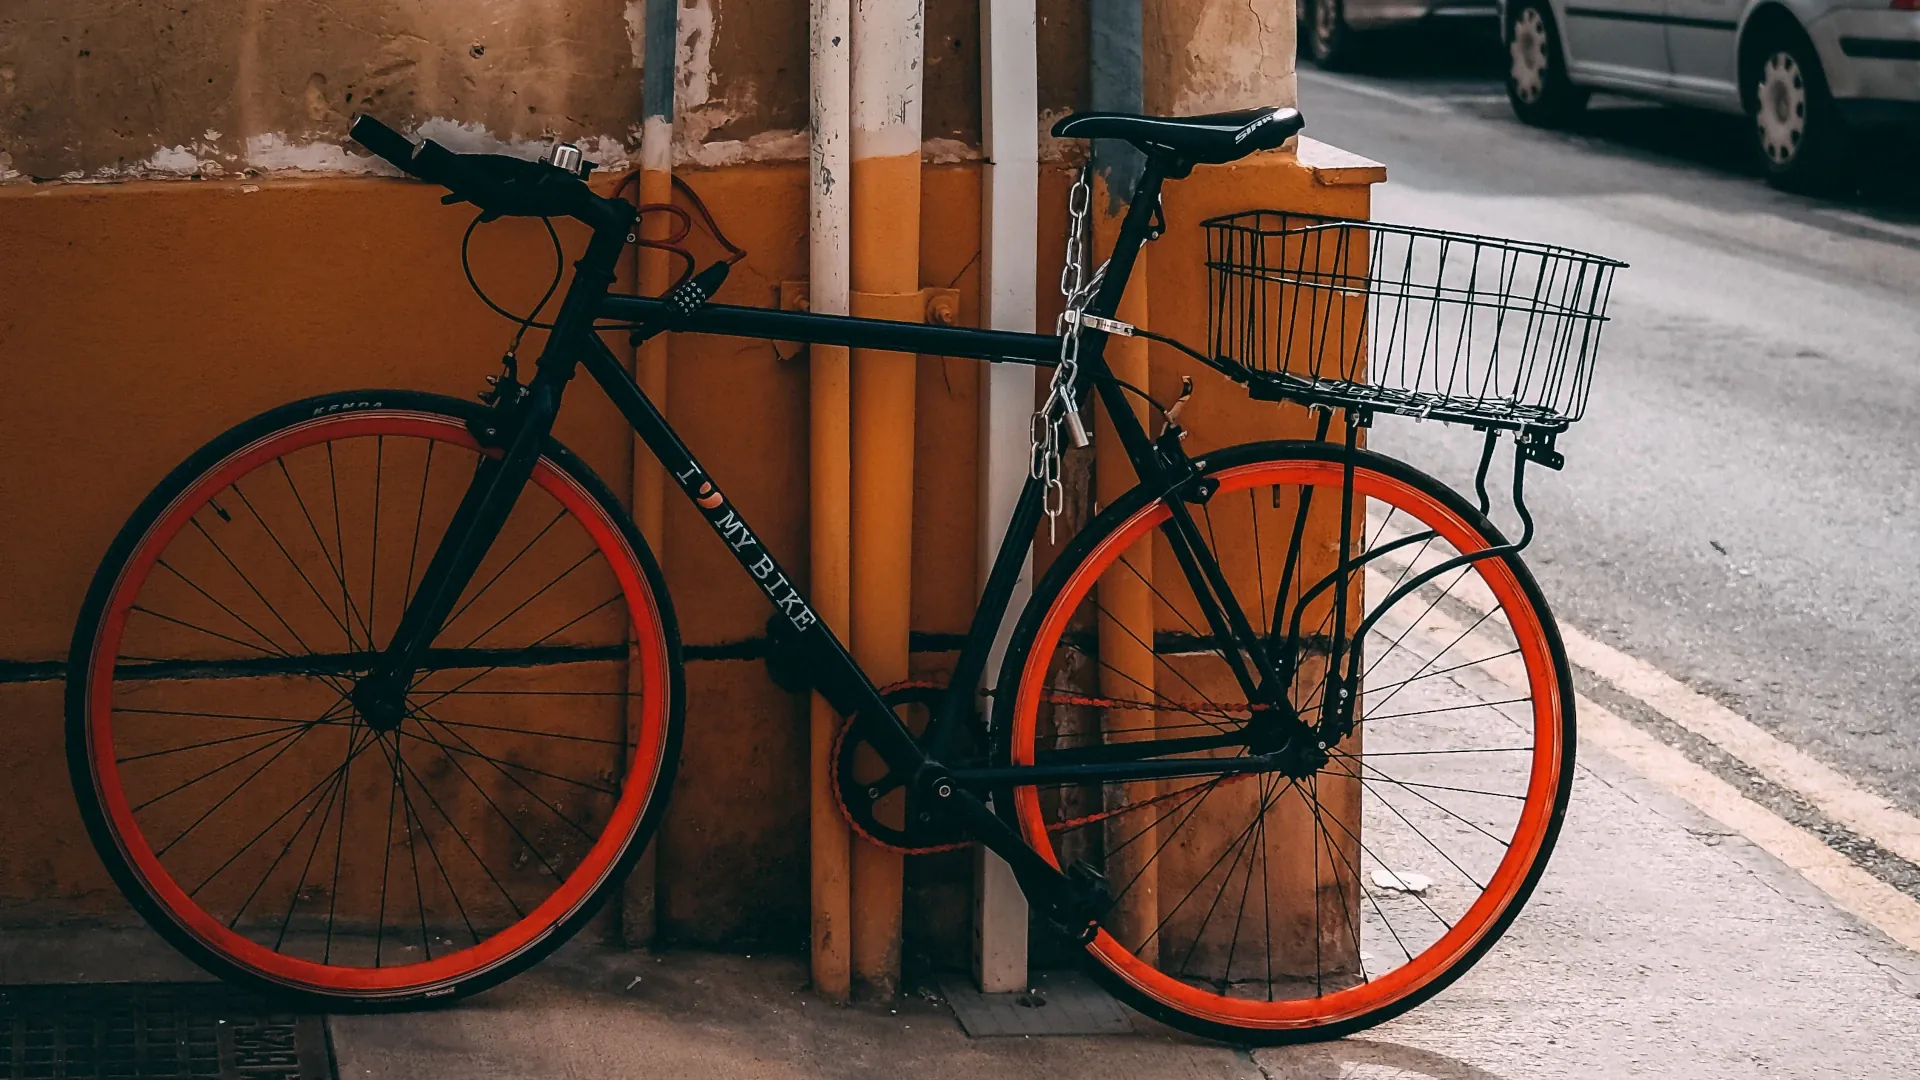 A locked bike in the town of Mosta, Malta.